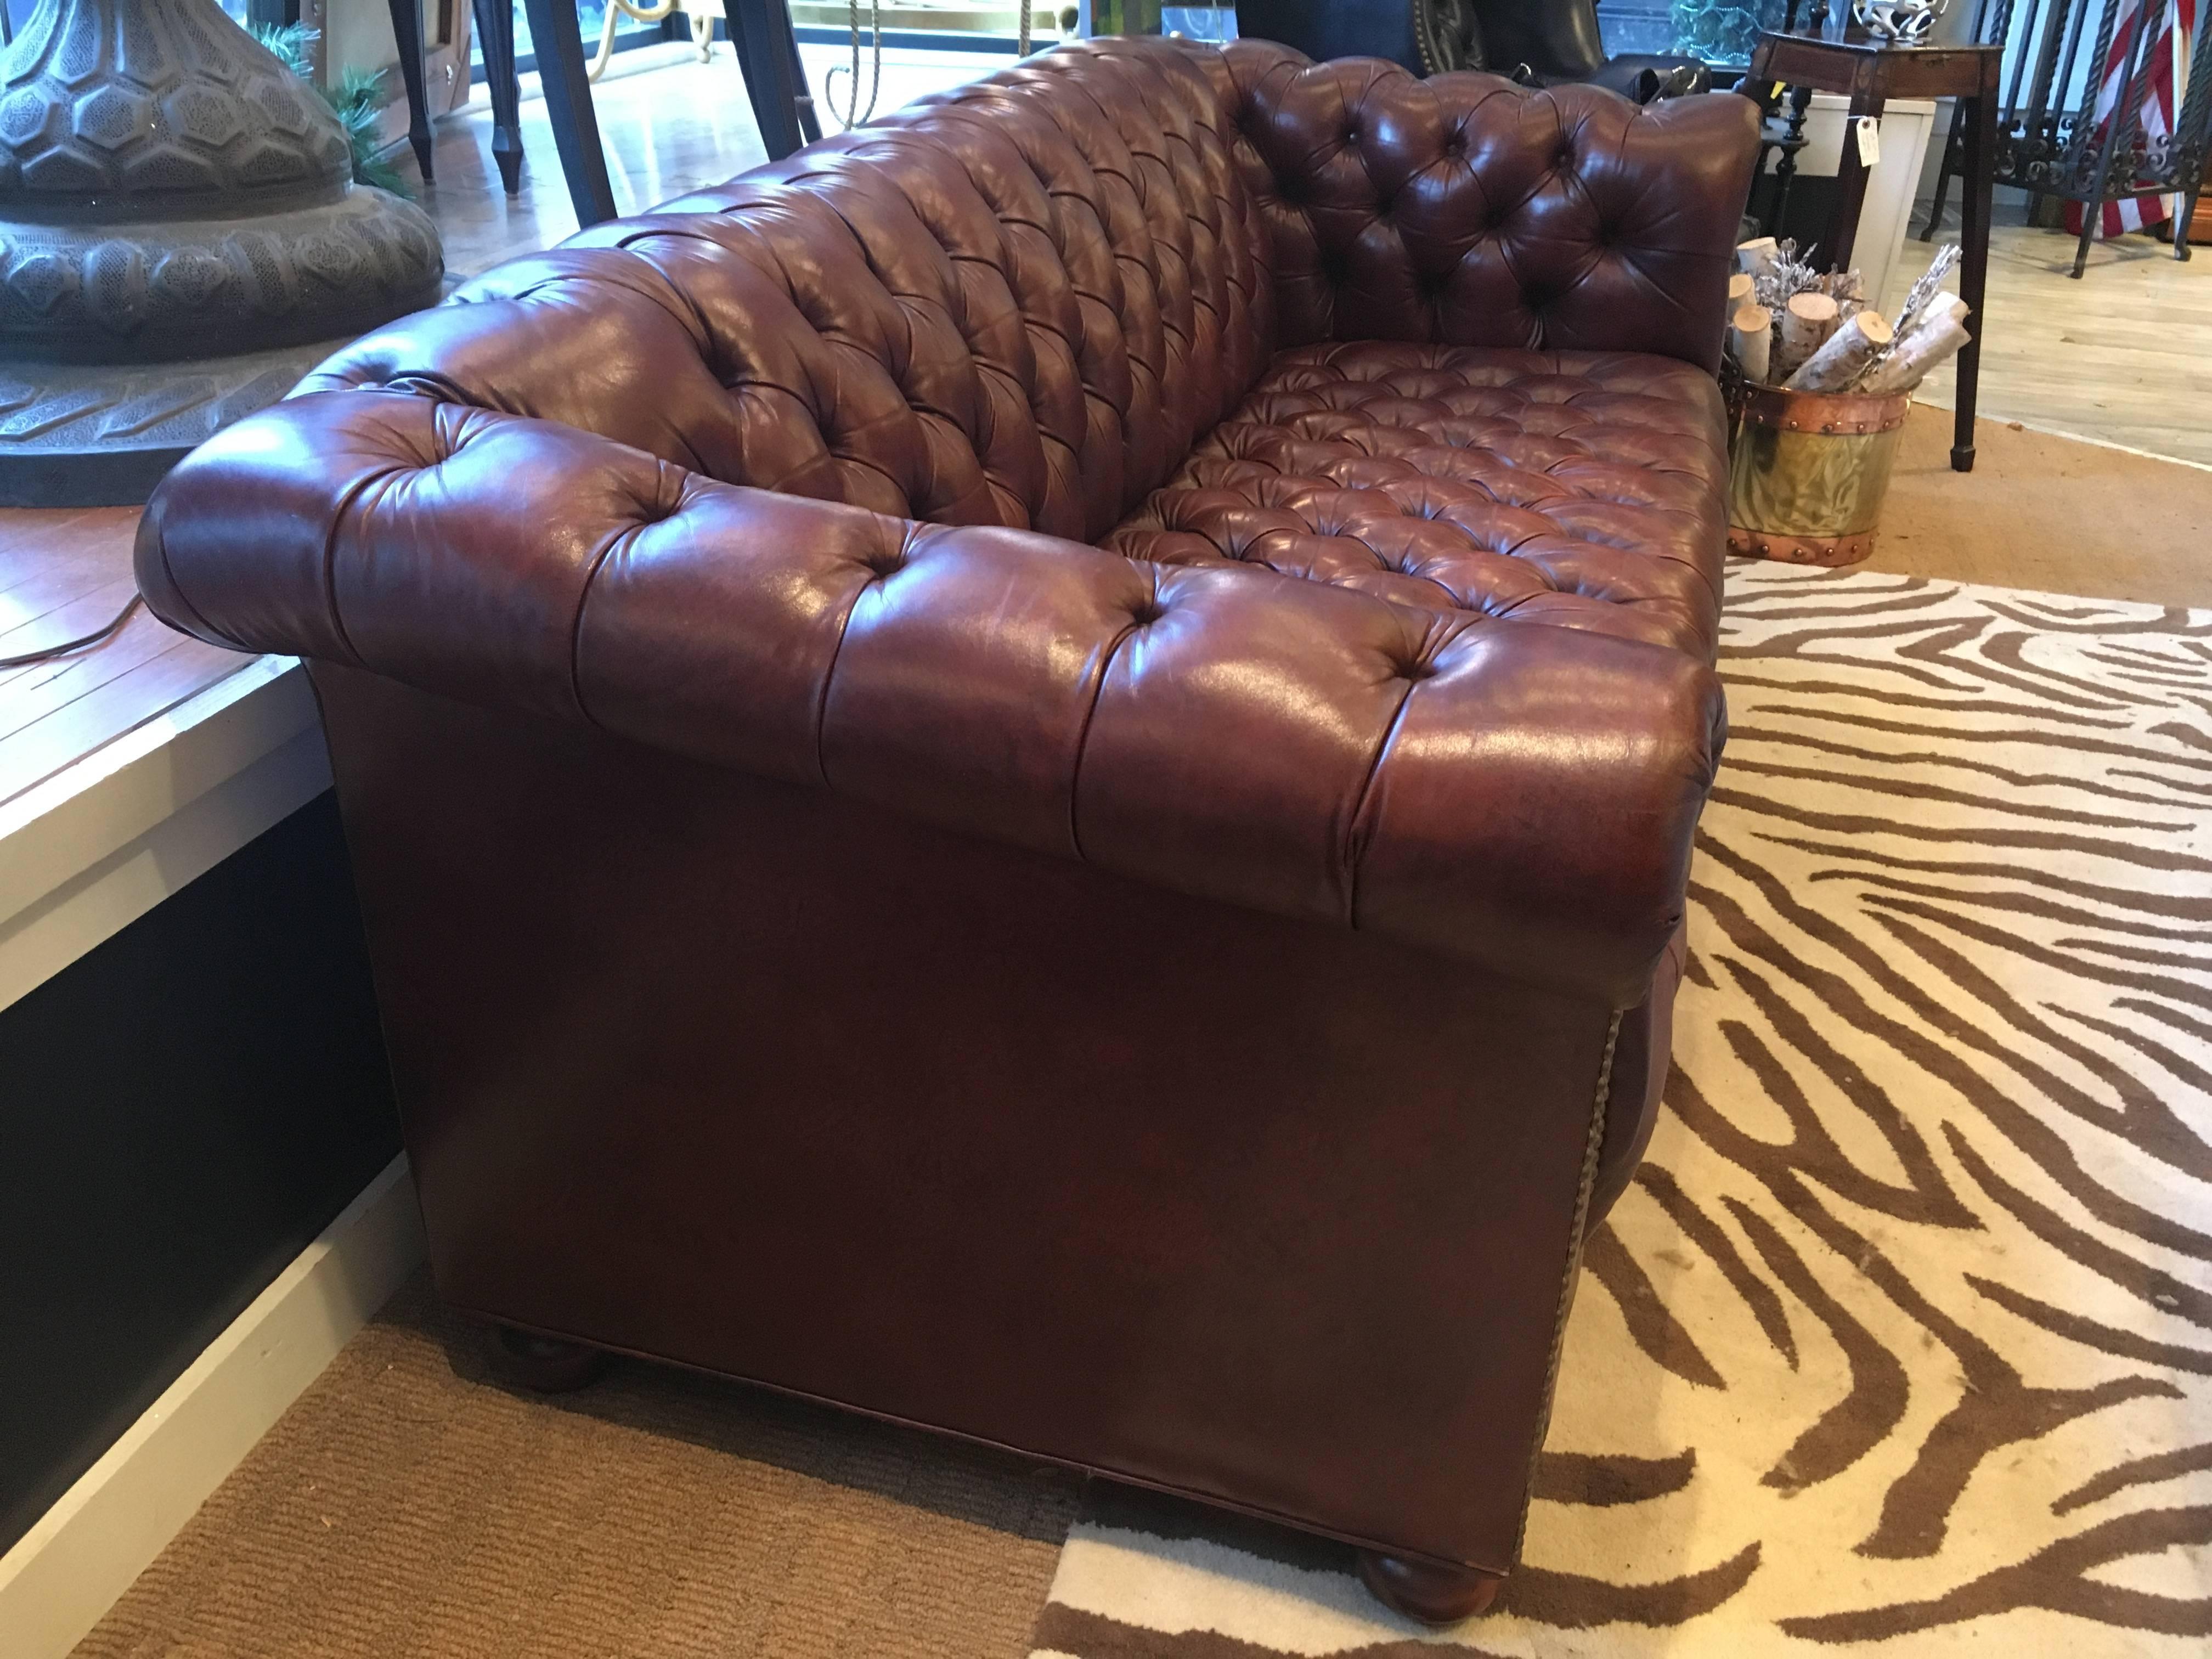 Vintage tufted top quality cigar brown leather Chesterfield sofa with scroll arms, wooden bun feet and handsome brass nailheads. Comfortable, traditional and classic style.